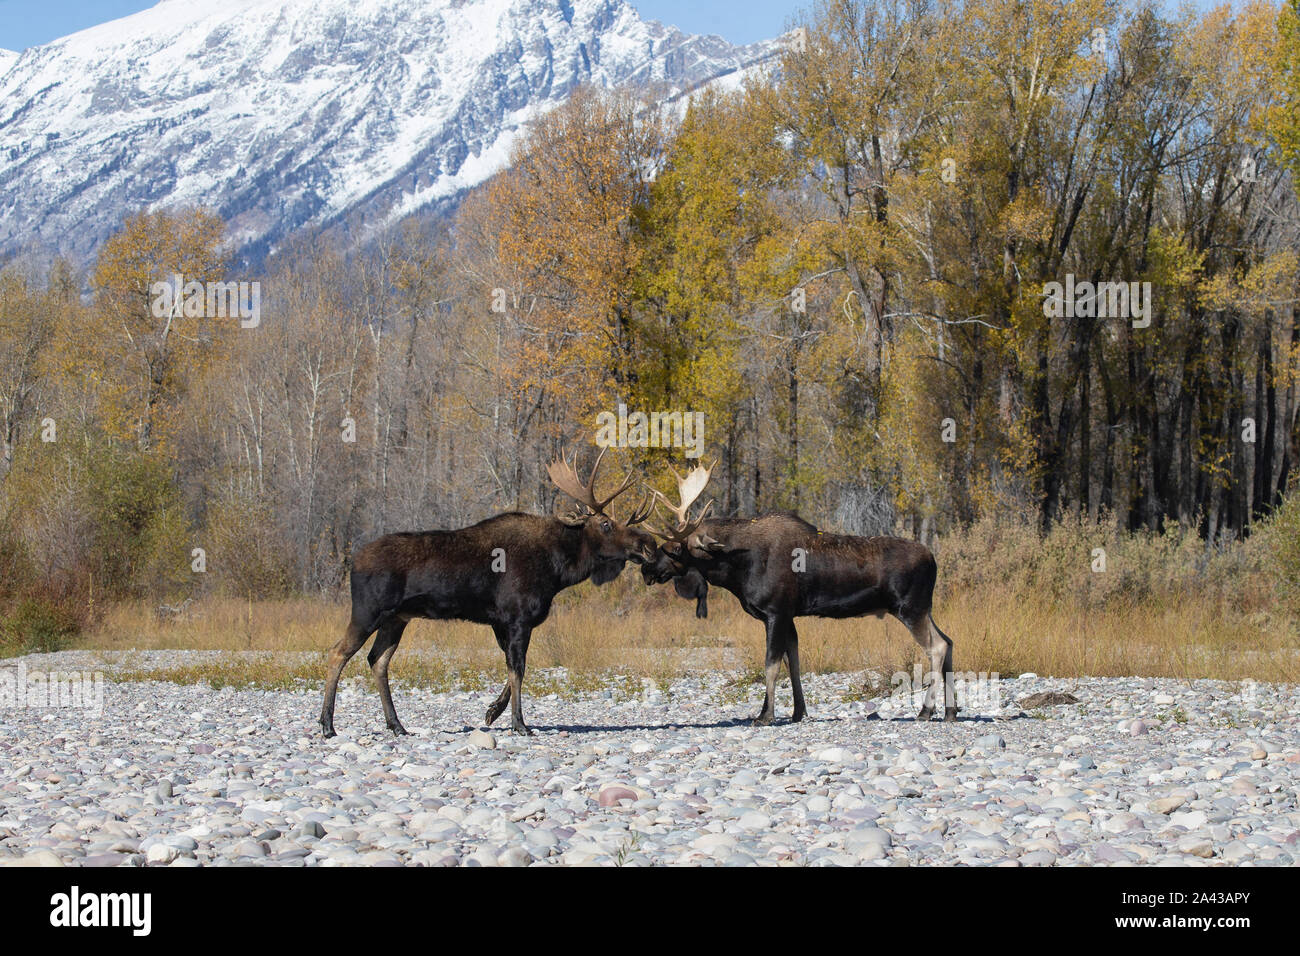 Two Bull Moose (Alces alces) facing off, Grand Teton National Park, Wyoming Stock Photo